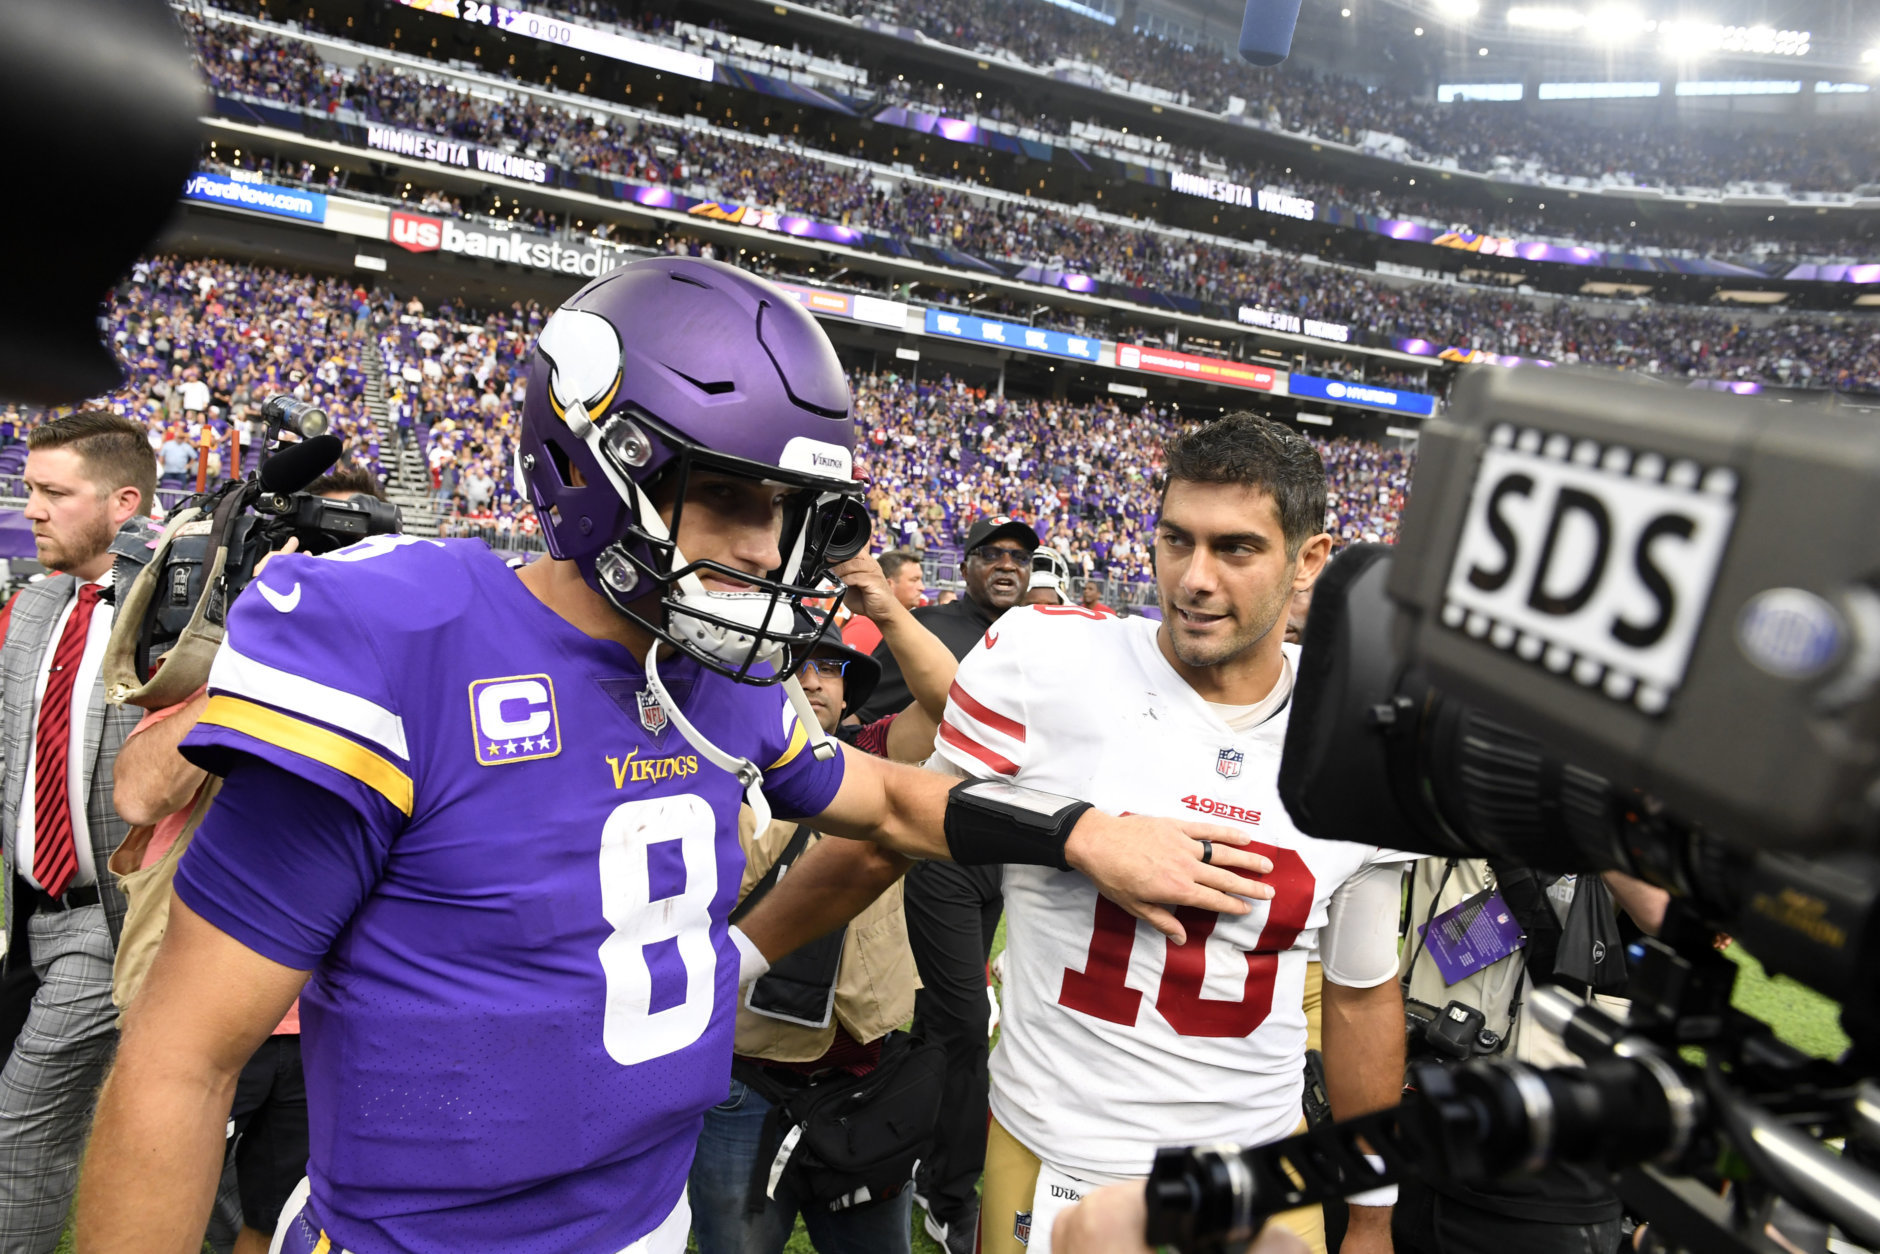 MINNEAPOLIS, MN - SEPTEMBER 09: Kirk Cousins #8 of the Minnesota Vikings and Jimmy Garoppolo #10 of the San Francisco 49ers greet each other on the field after the game at U.S. Bank Stadium on September 9, 2018 in Minneapolis, Minnesota. The Vikings defeated the 49ers 24-16.  (Photo by Hannah Foslien/Getty Images)